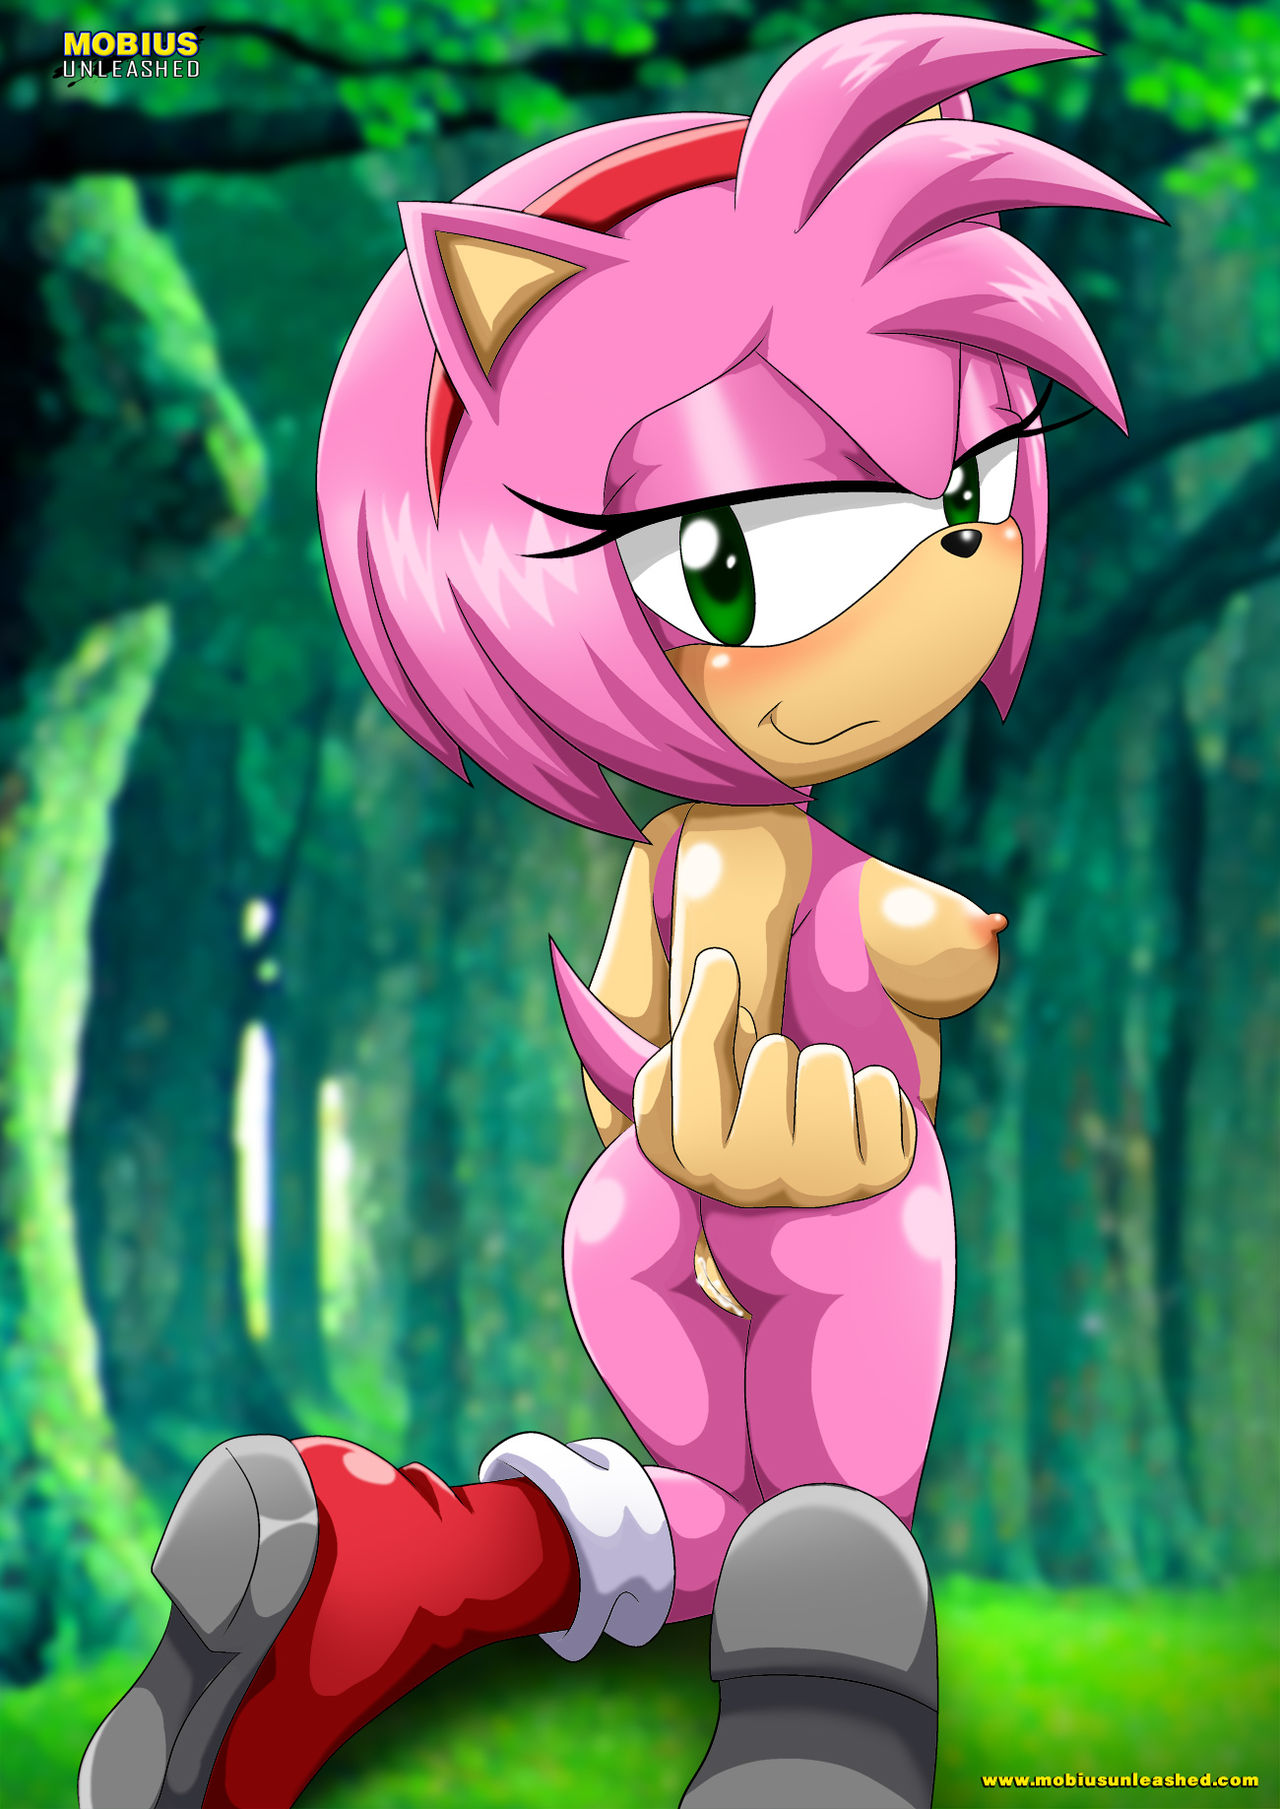 Mobius unleashed amy